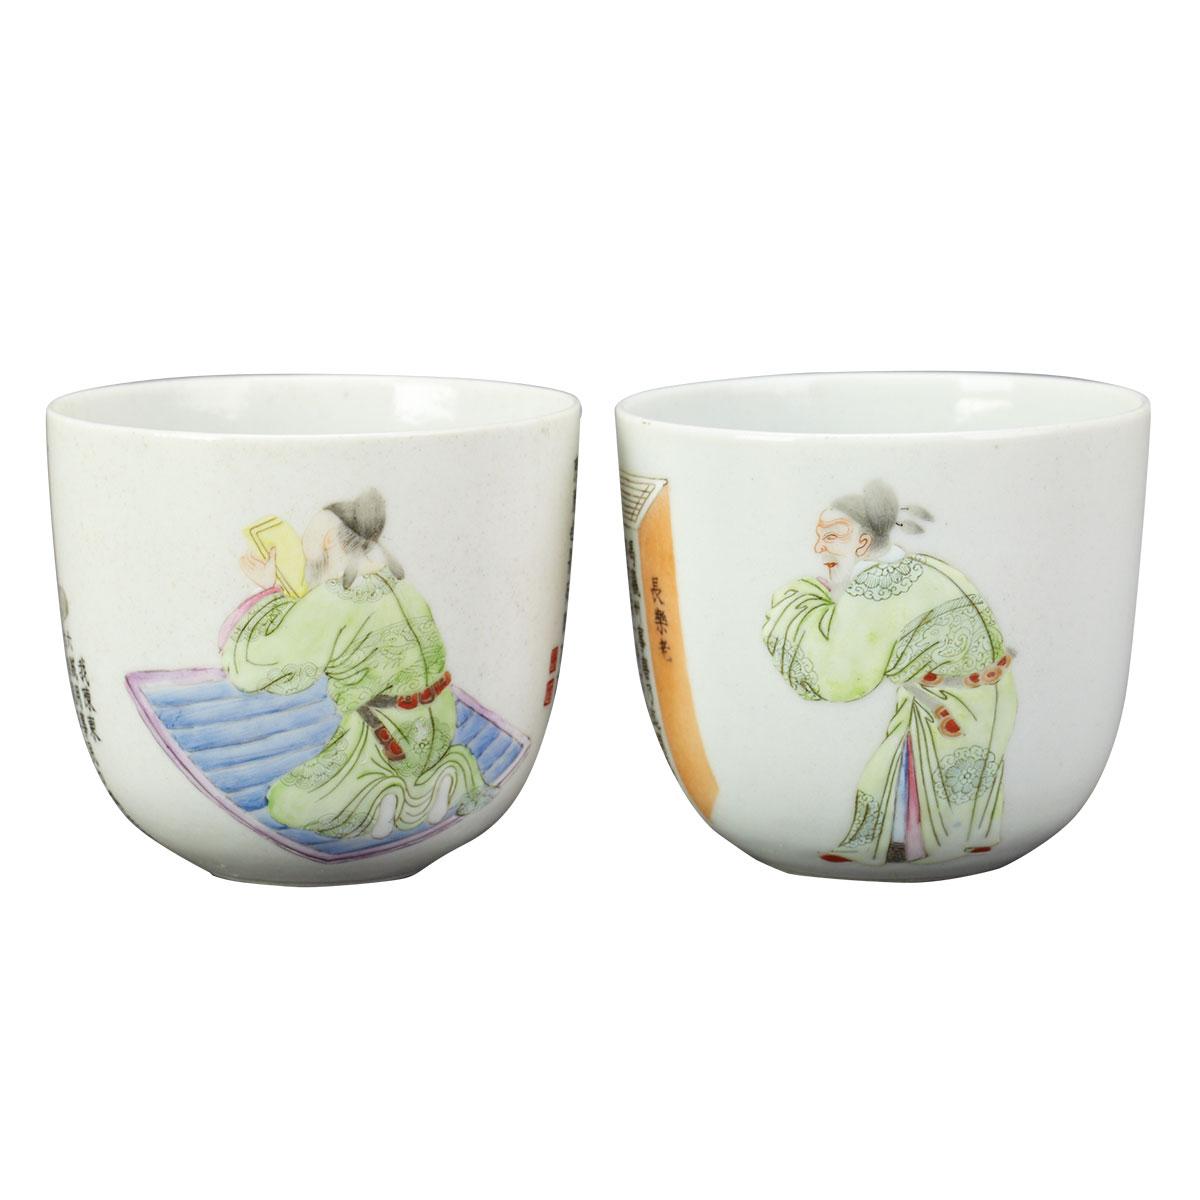 Pair of ‘Historical Figure’ Wine Cups, Jiaqing Mark and Period (1796-1820)